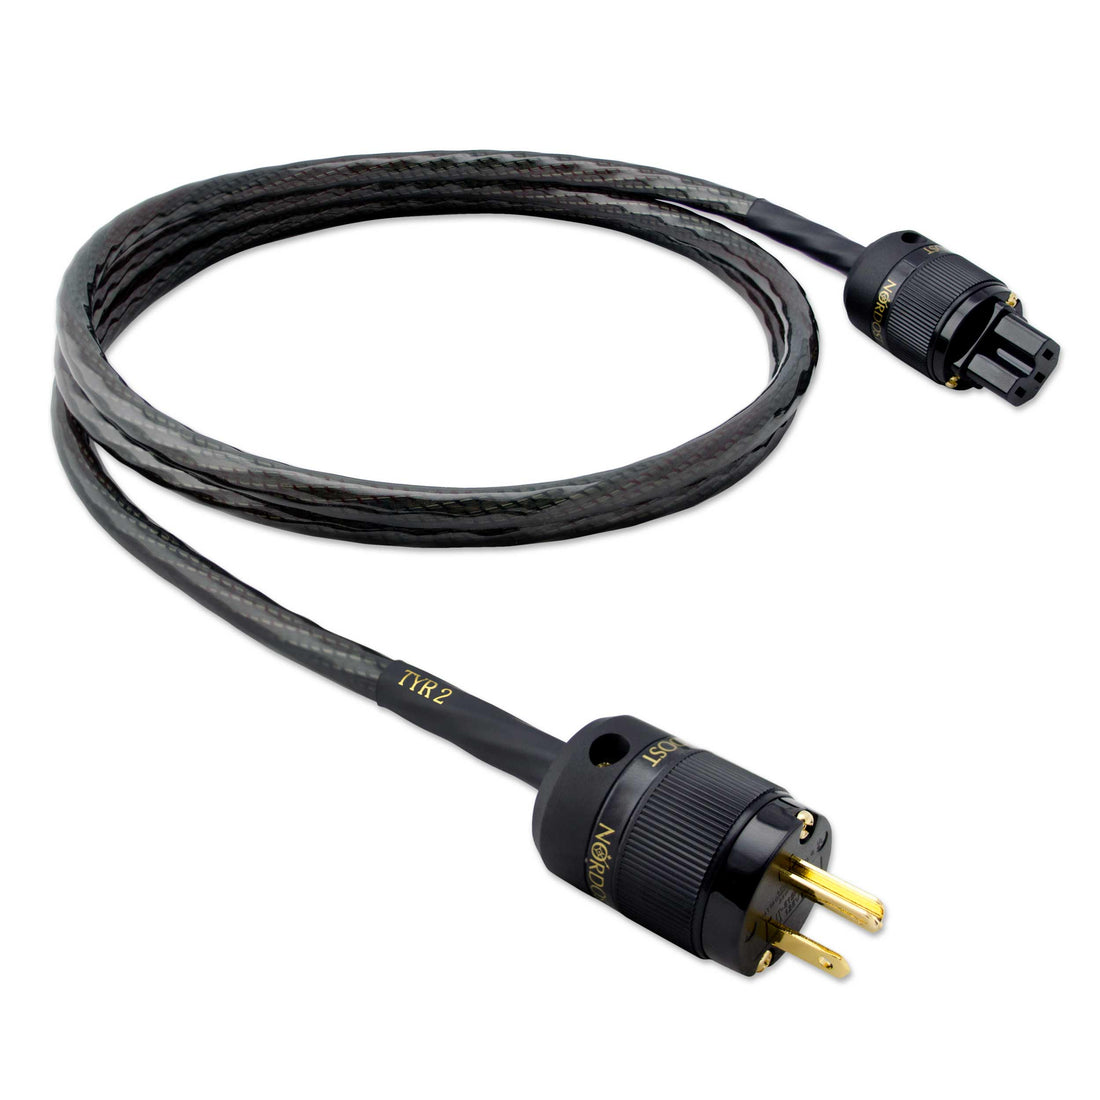 Tyr 2 Power Cable